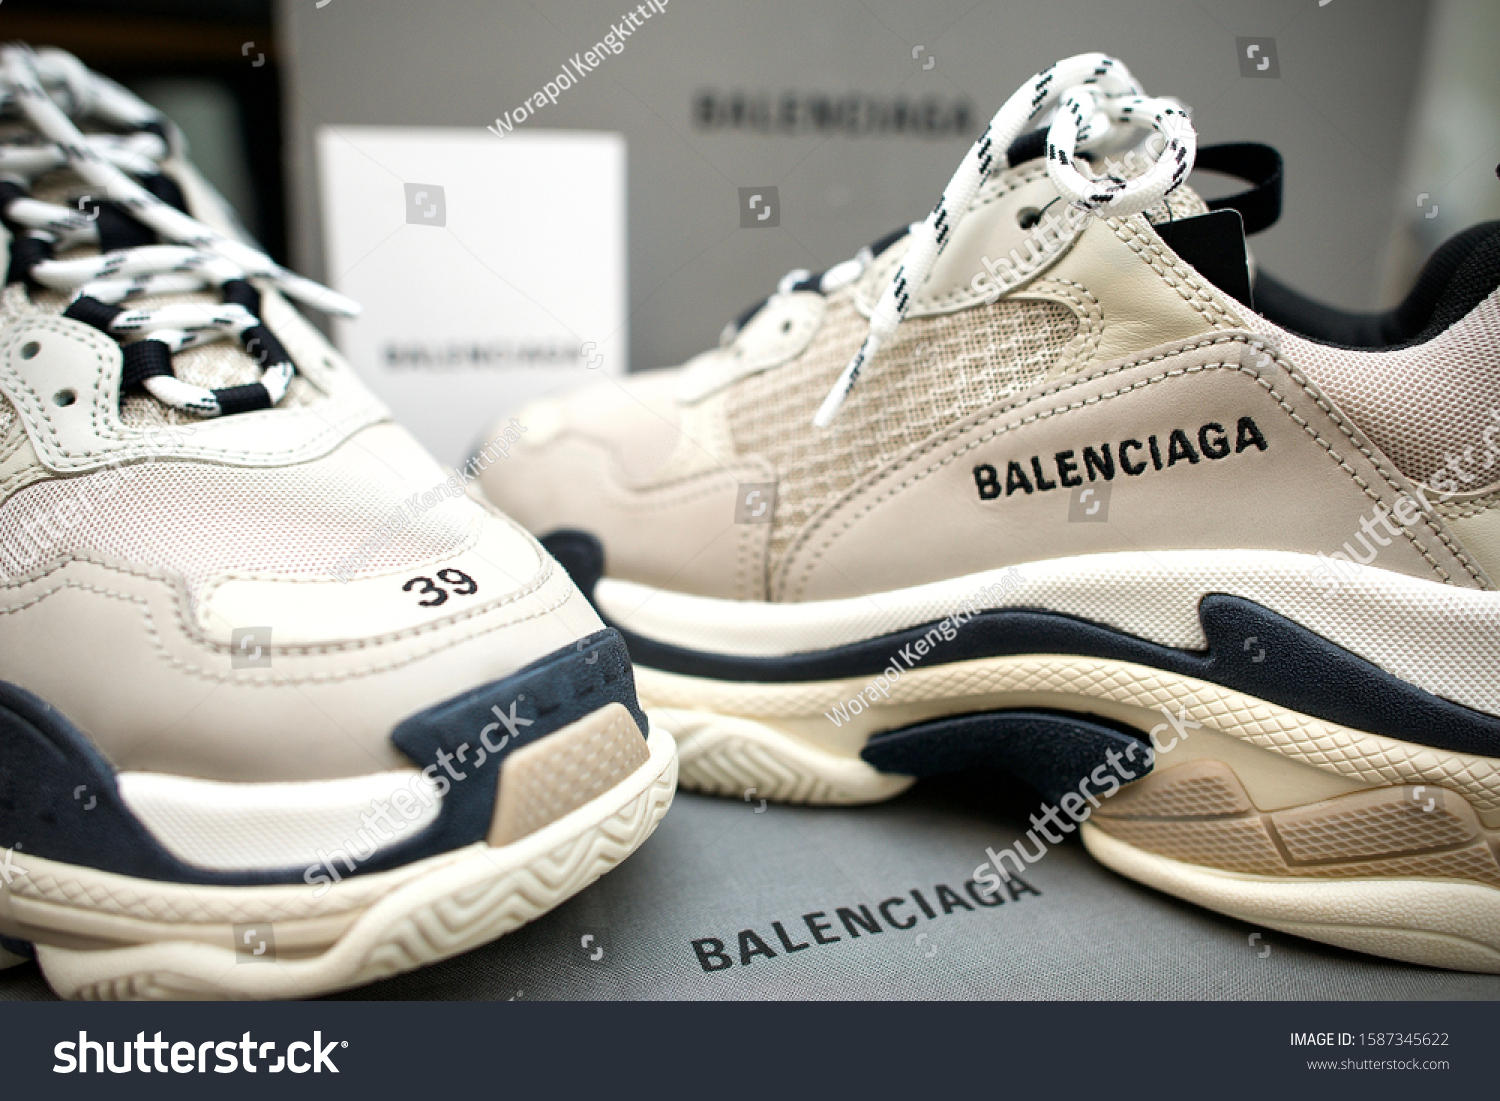 Outgoing swallow staff One Most Famous Sneaker Band Balenciaga Stock Photo 1587345622 |  Shutterstock